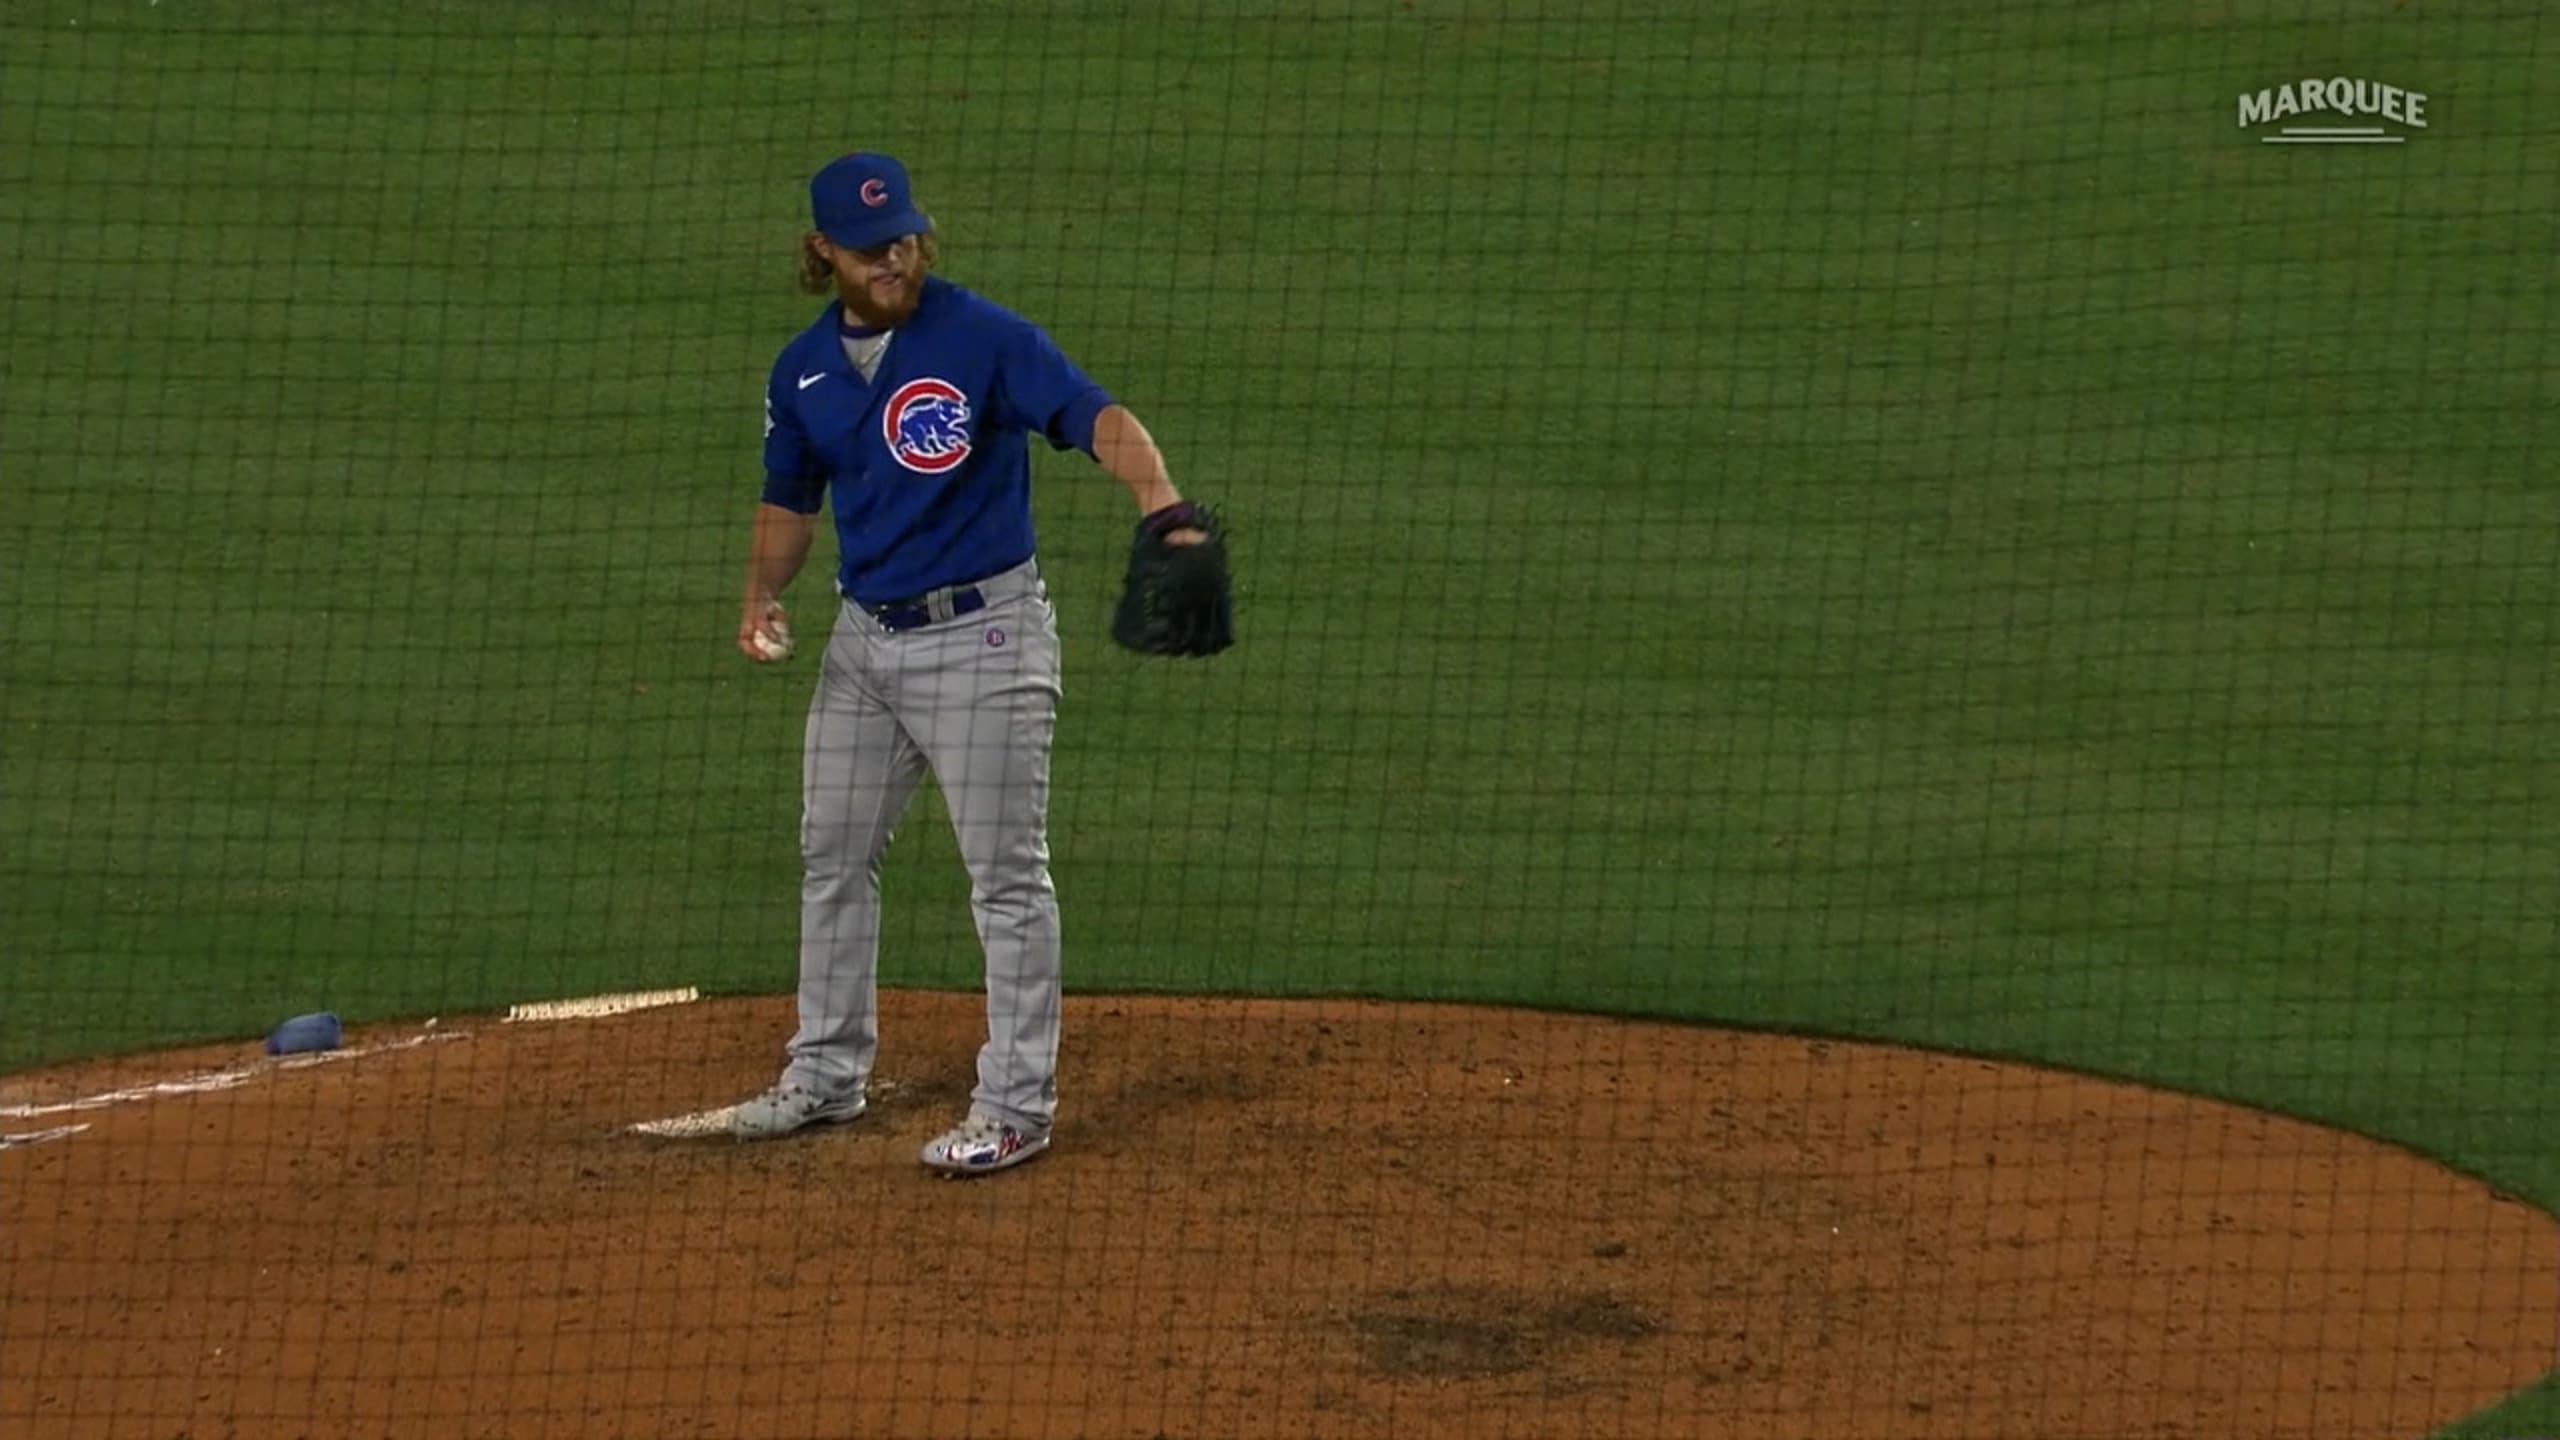 7 Cubs pitchers combine for no-hitter vs. Padres – NBC Sports Chicago